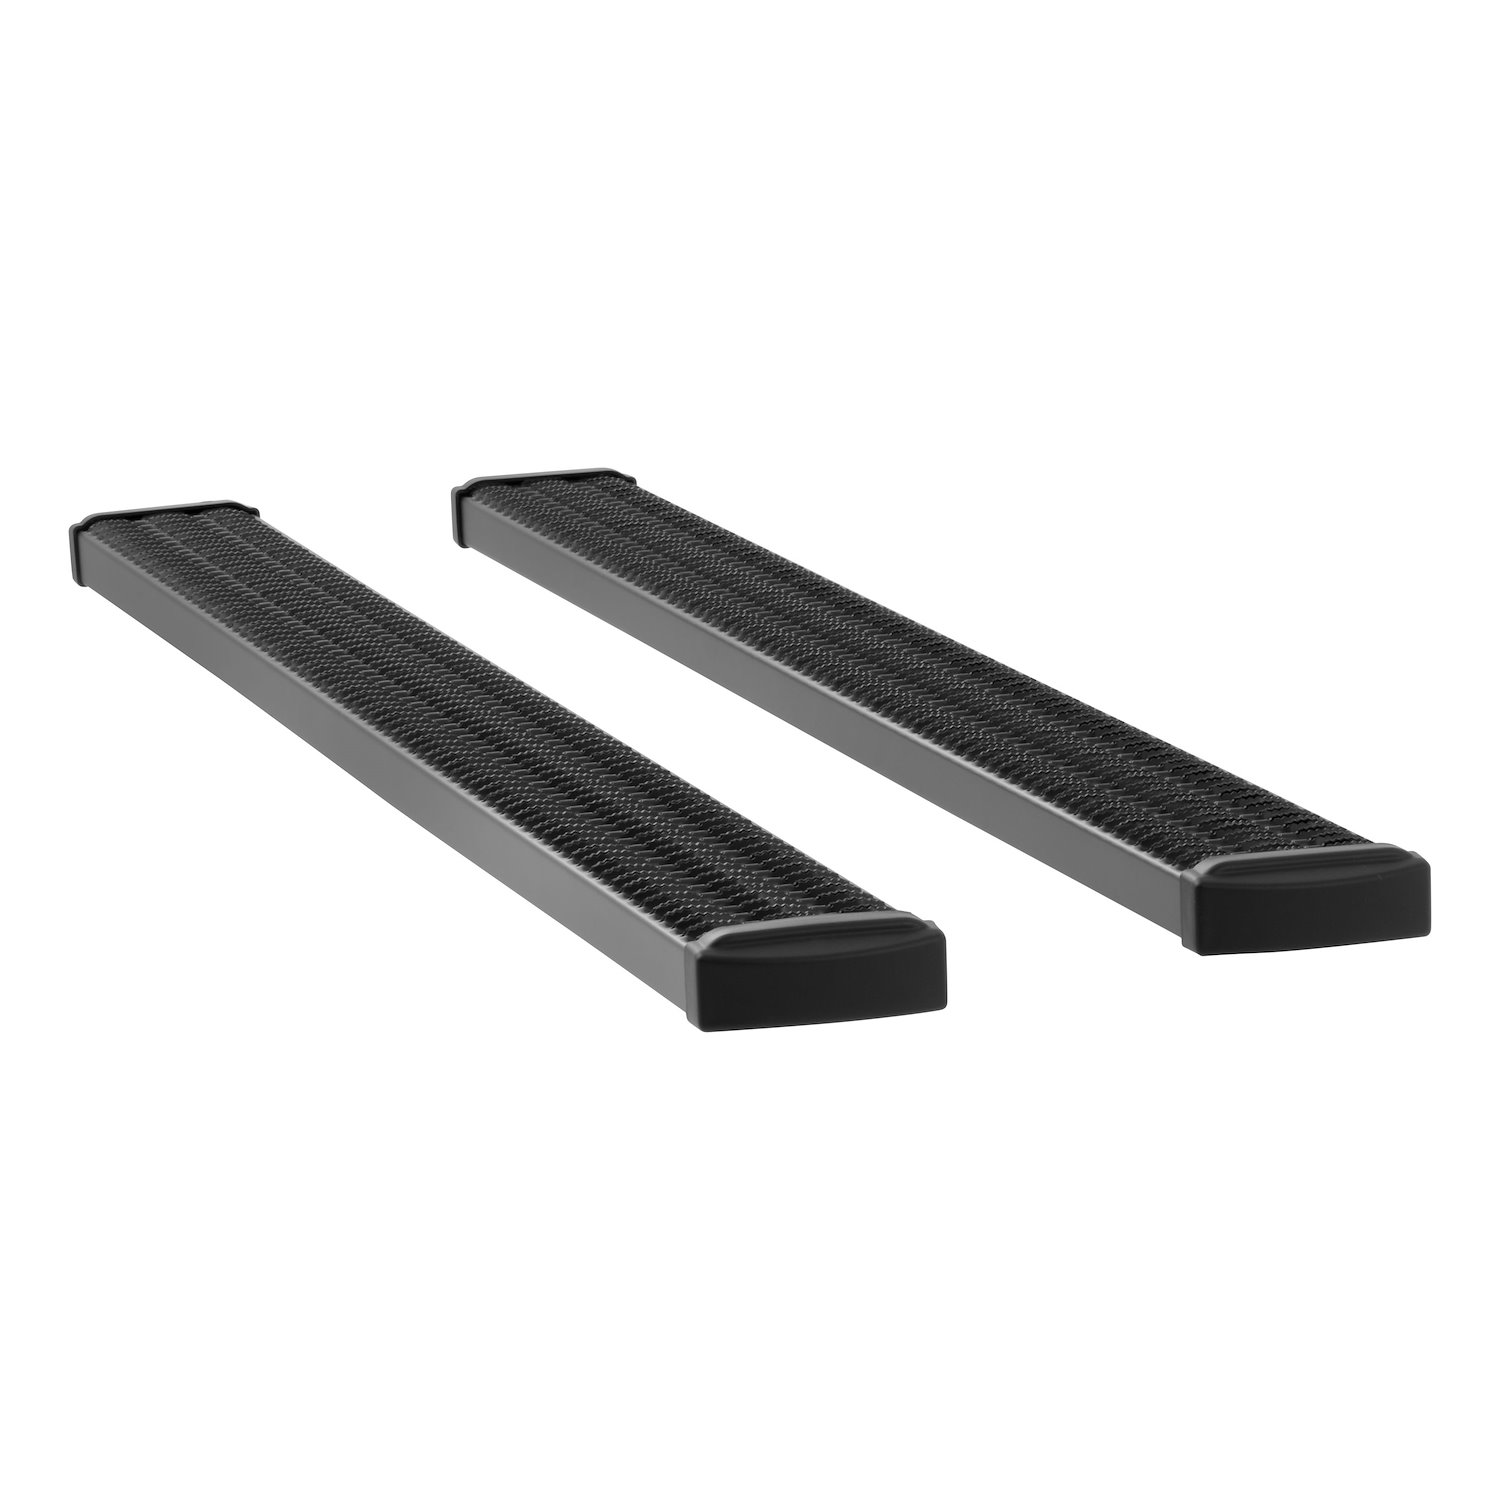 415088-401632 Grip Step 7 in. x 88 in. Black Aluminum Running Boards Fits Select Dodge, Ram